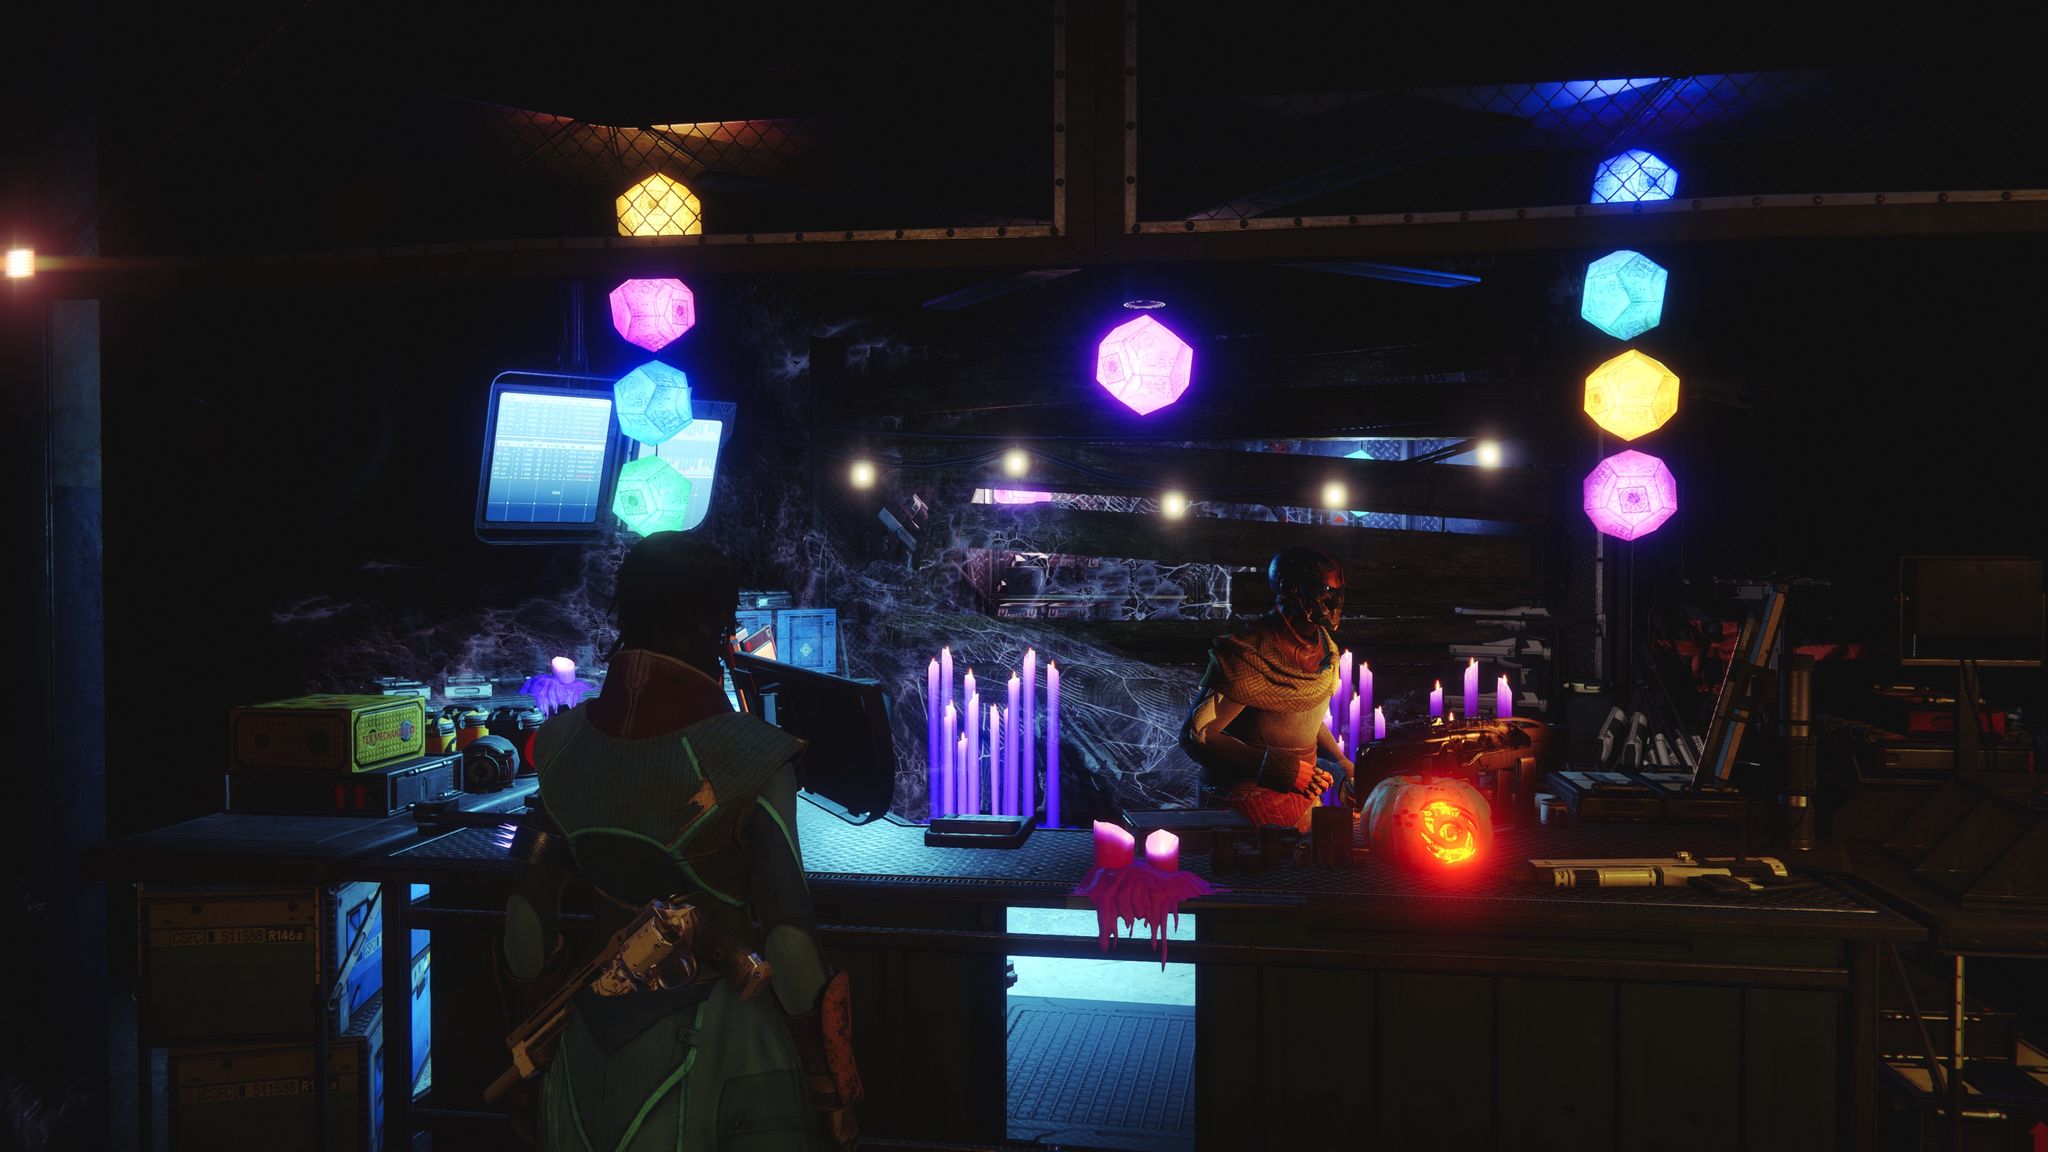 Another screenshot showing a robot character called Banshee-44 in his shop, with more of the glowing lights and tall purple candles scattered around.